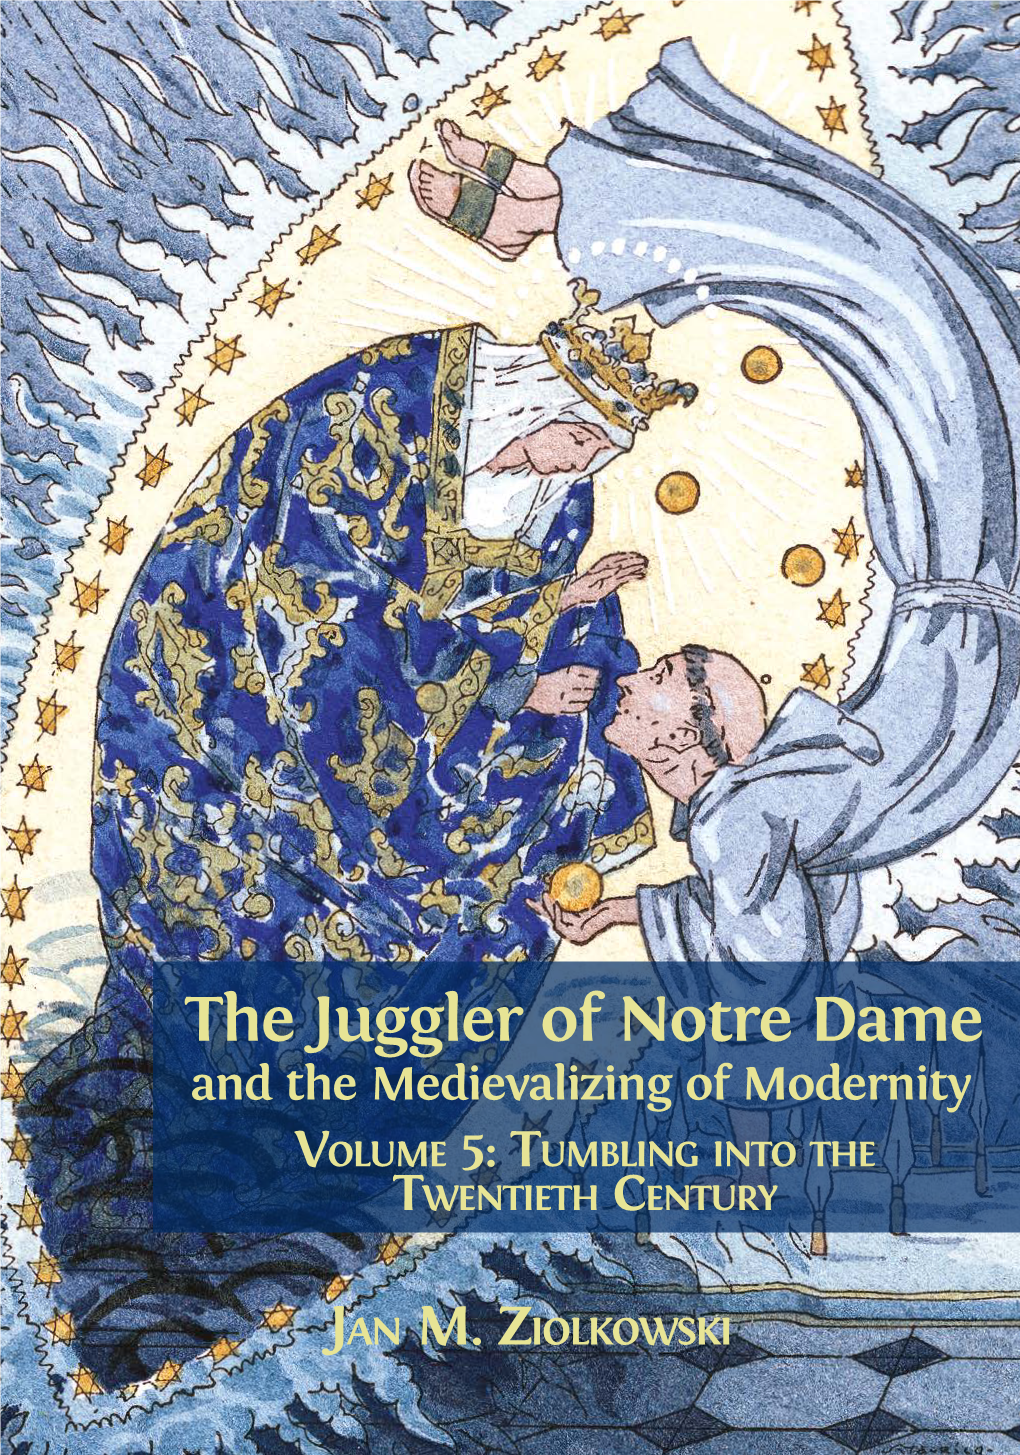 The Juggler of Notre Dame and the Medievalizing of Modernity VOLUME 5: TUMBLING INTO the TWENTIETH CENTURY